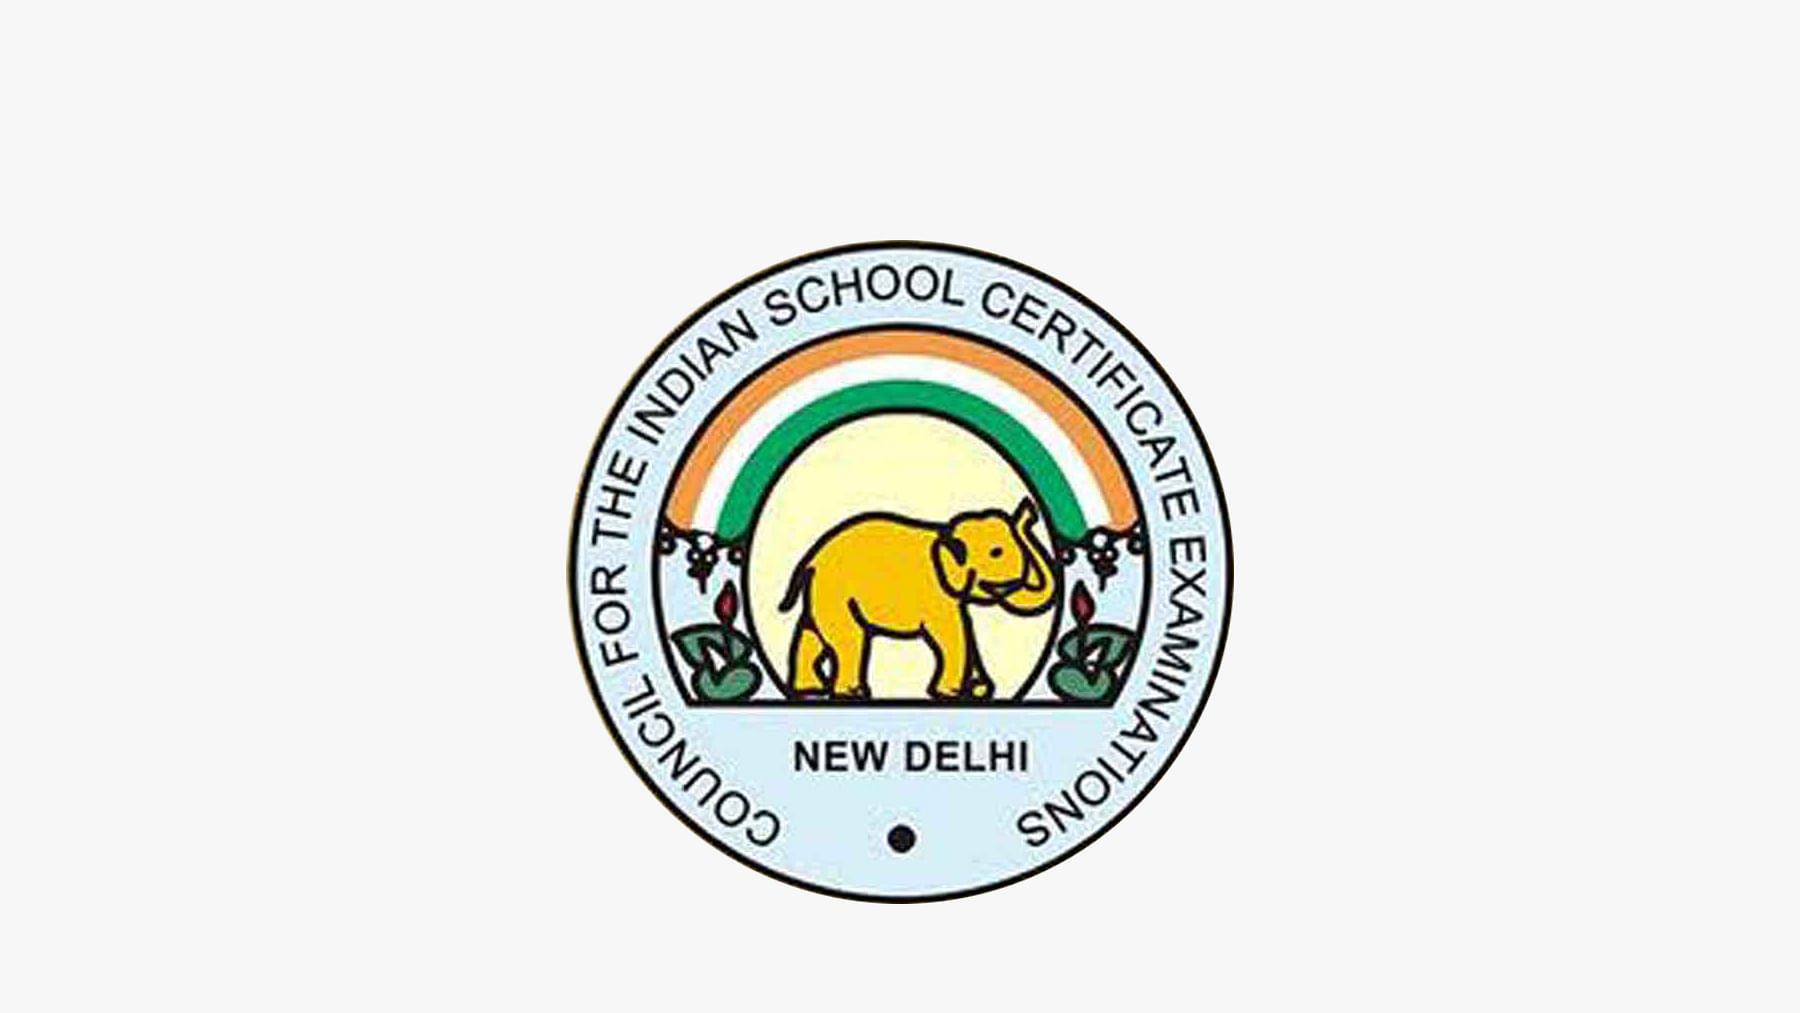 CISCE said it has worked with experts to reduce the syllabus at ICSE and ISC level.